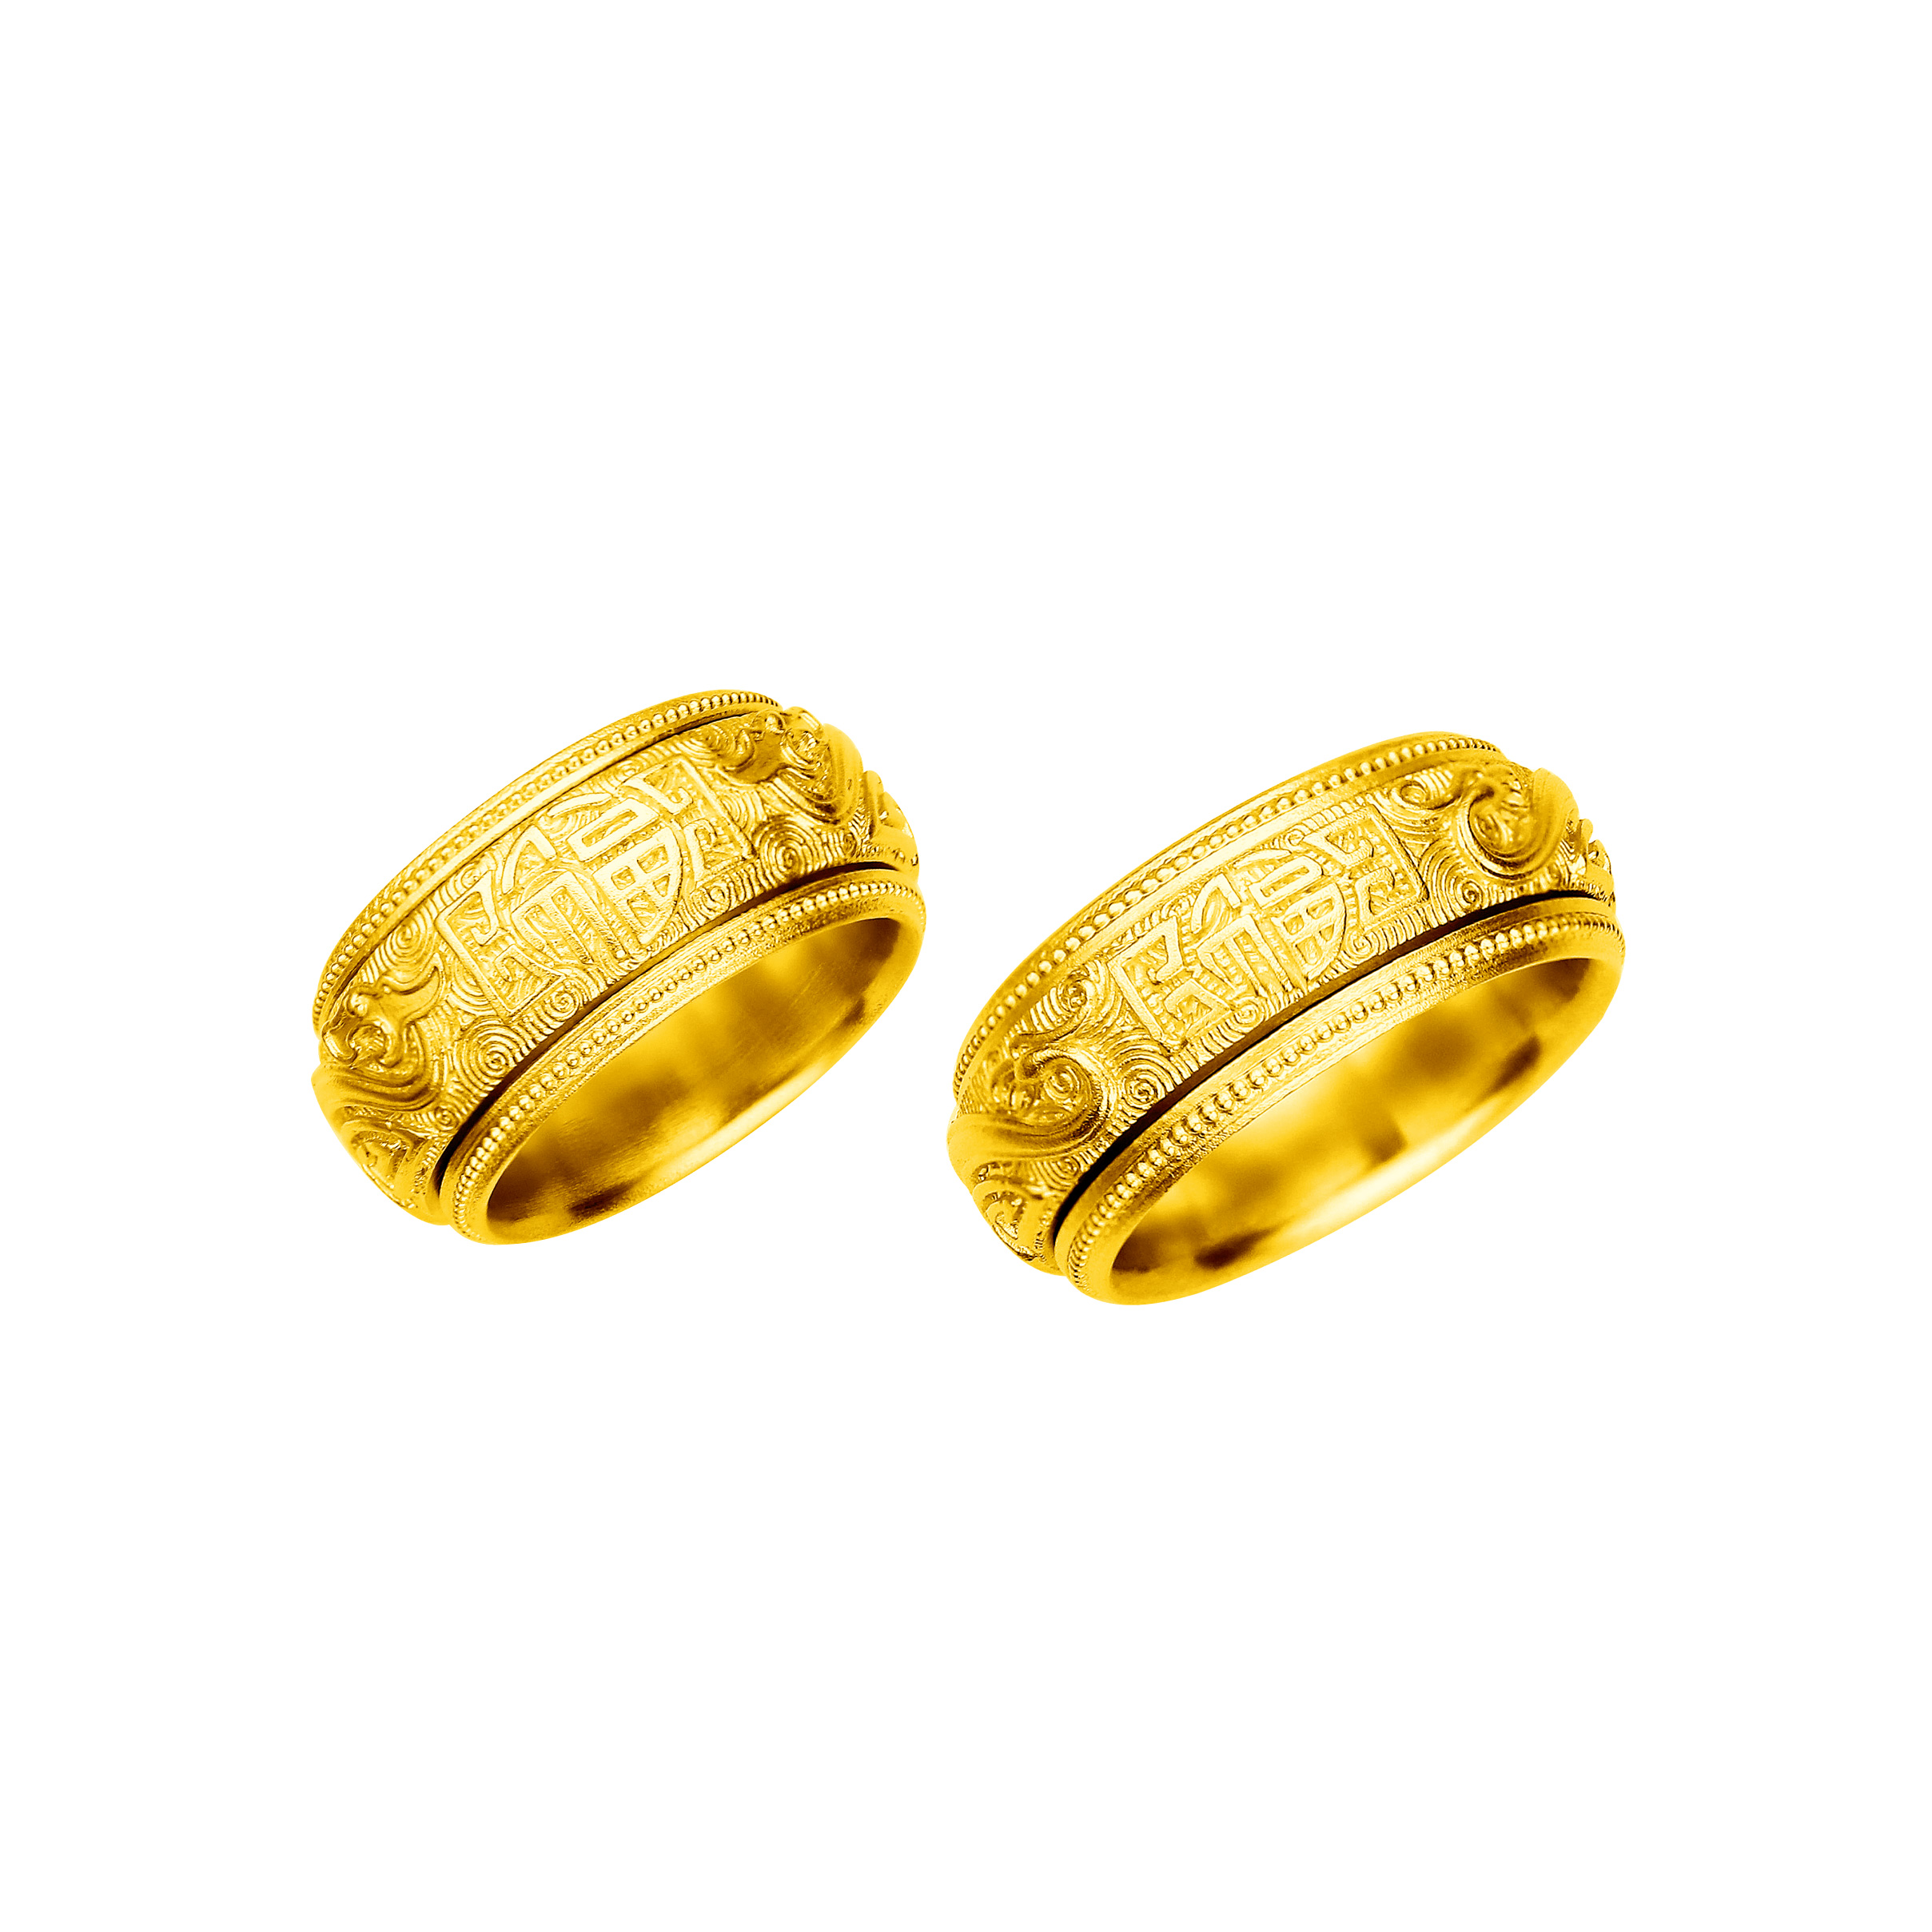 Antique Gold"Celebration of Blessings"Gold Couple Rings